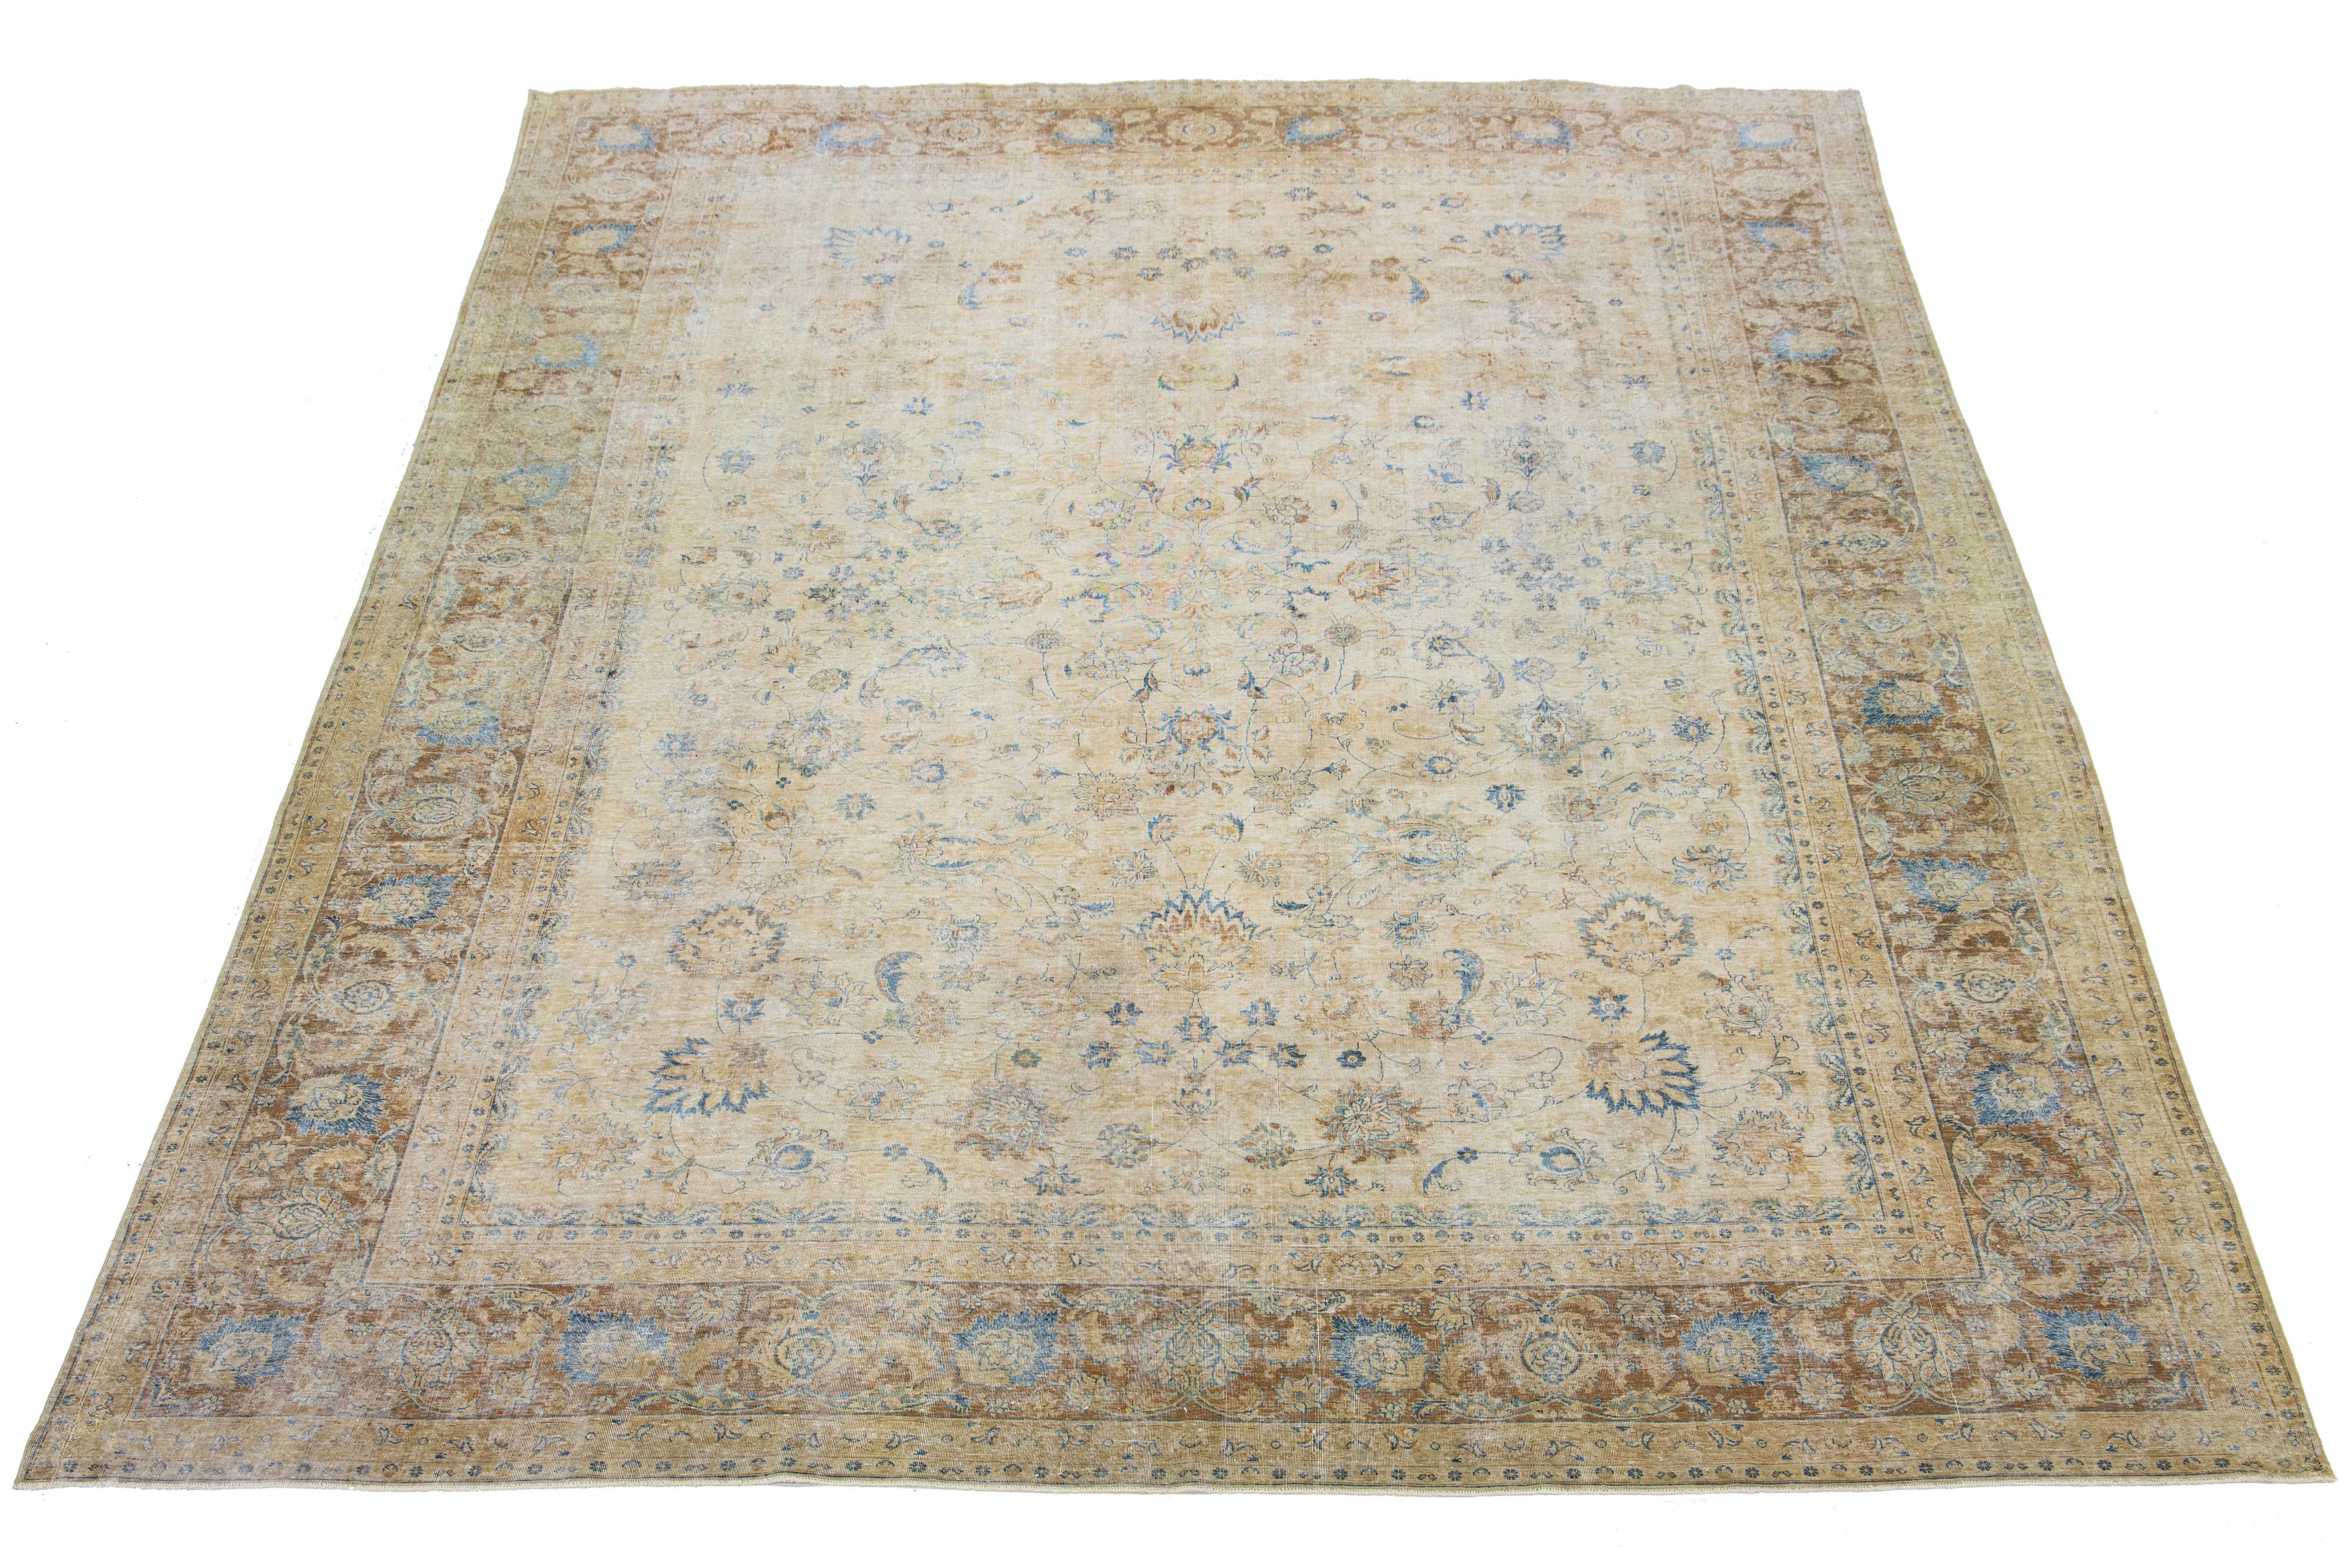 This Persian Tabriz wool rug, handcrafted, showcases a traditional floral pattern. The contrast between the brown and beige backdrop emphasizes the blue floral design.

This rug measures 11'4